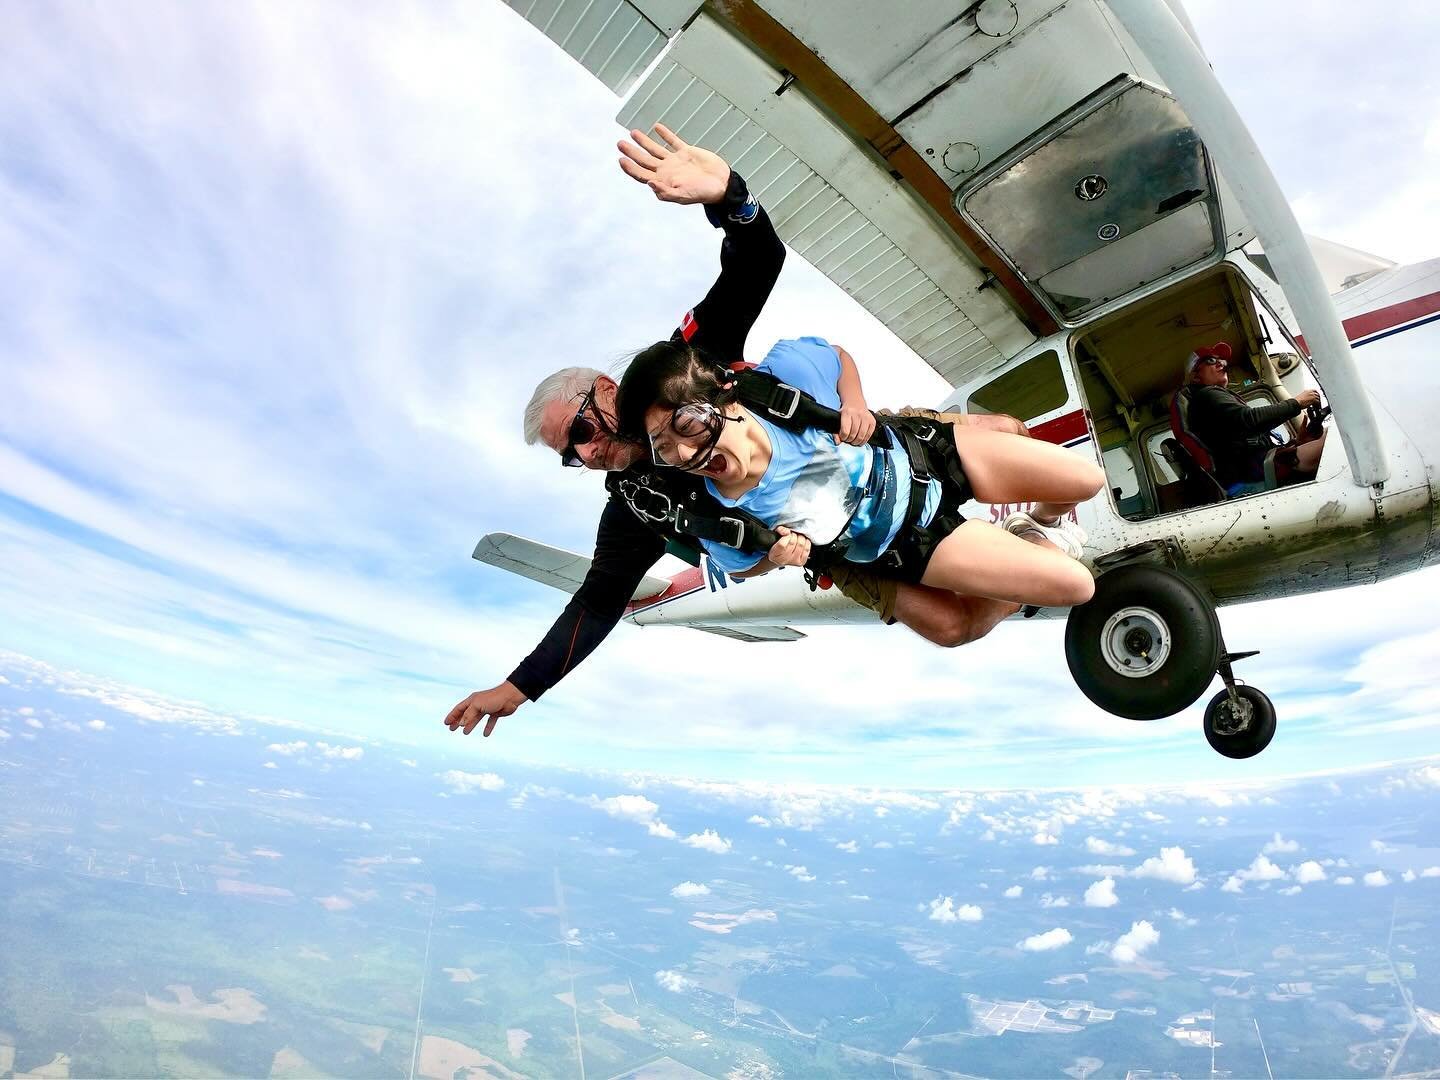 Have you done a tandem at Skydive Palatka? Tag us your exit face pictures! Our talented videographers are always ready to capture every heart-pounding moment as you soar through the skies! 🌟🪂

Don&rsquo;t miss out on the chance to take the leap thi